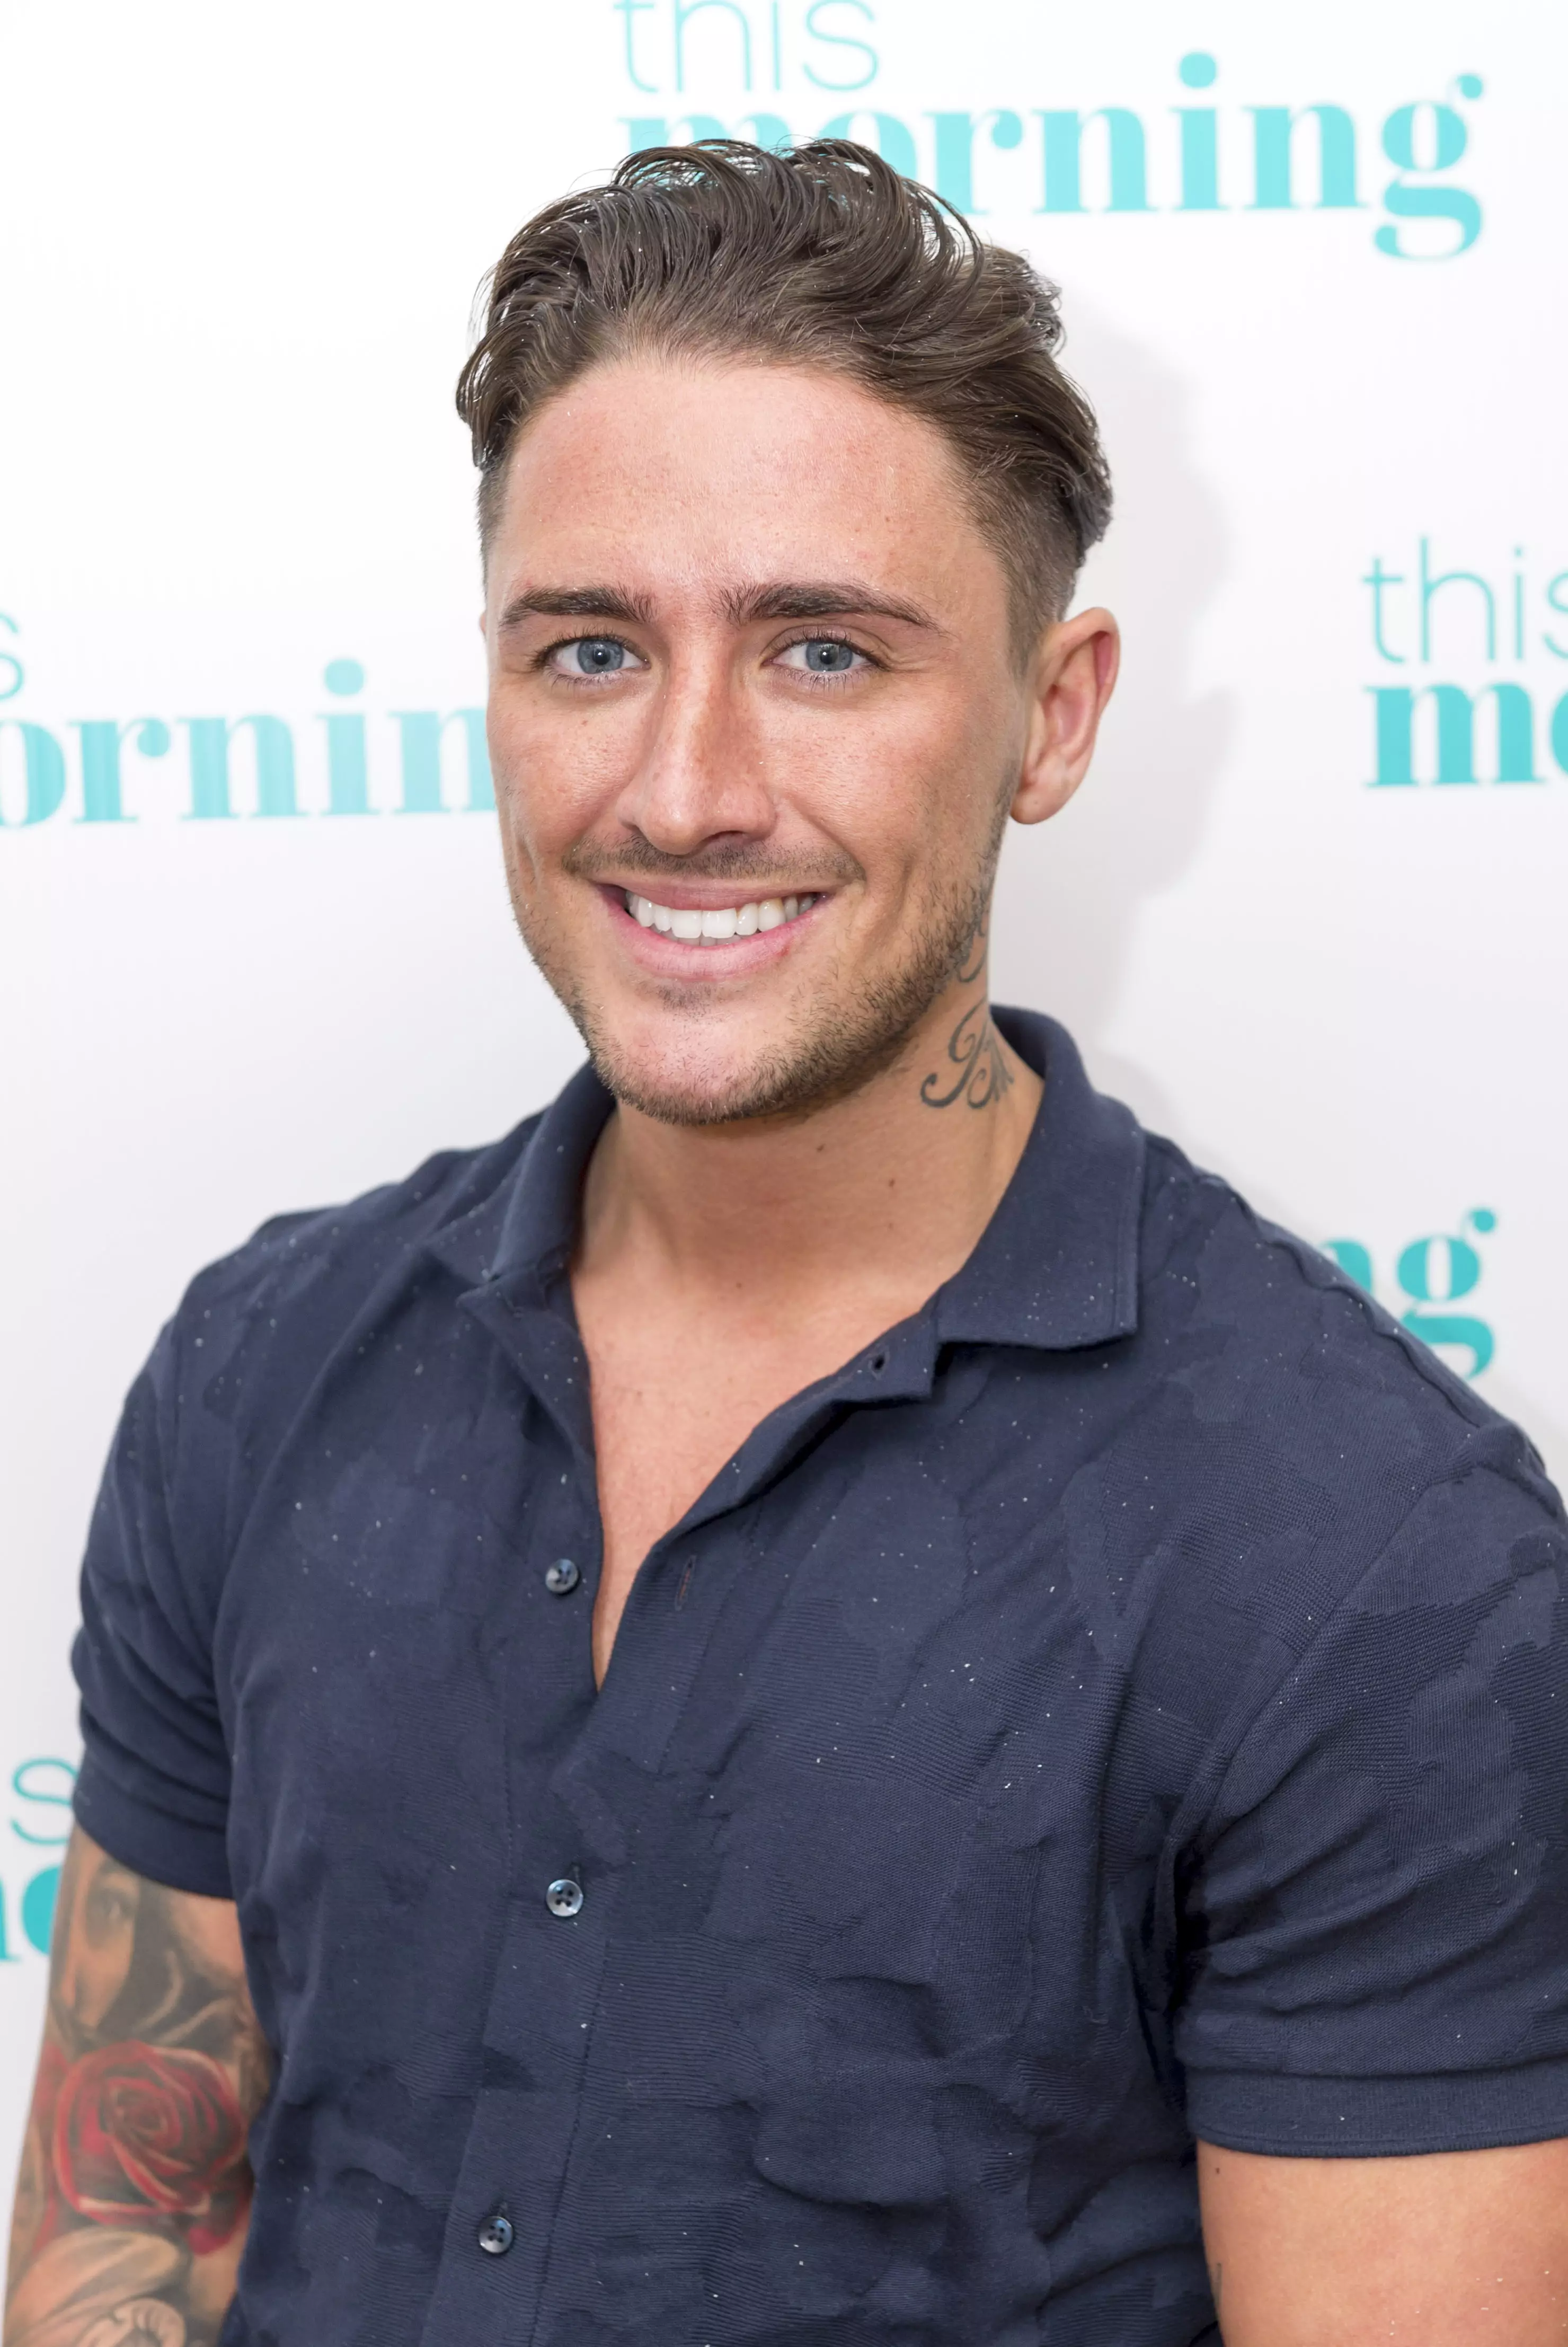 Stephen Bear was arrested at Heathrow Airport on his birthday (